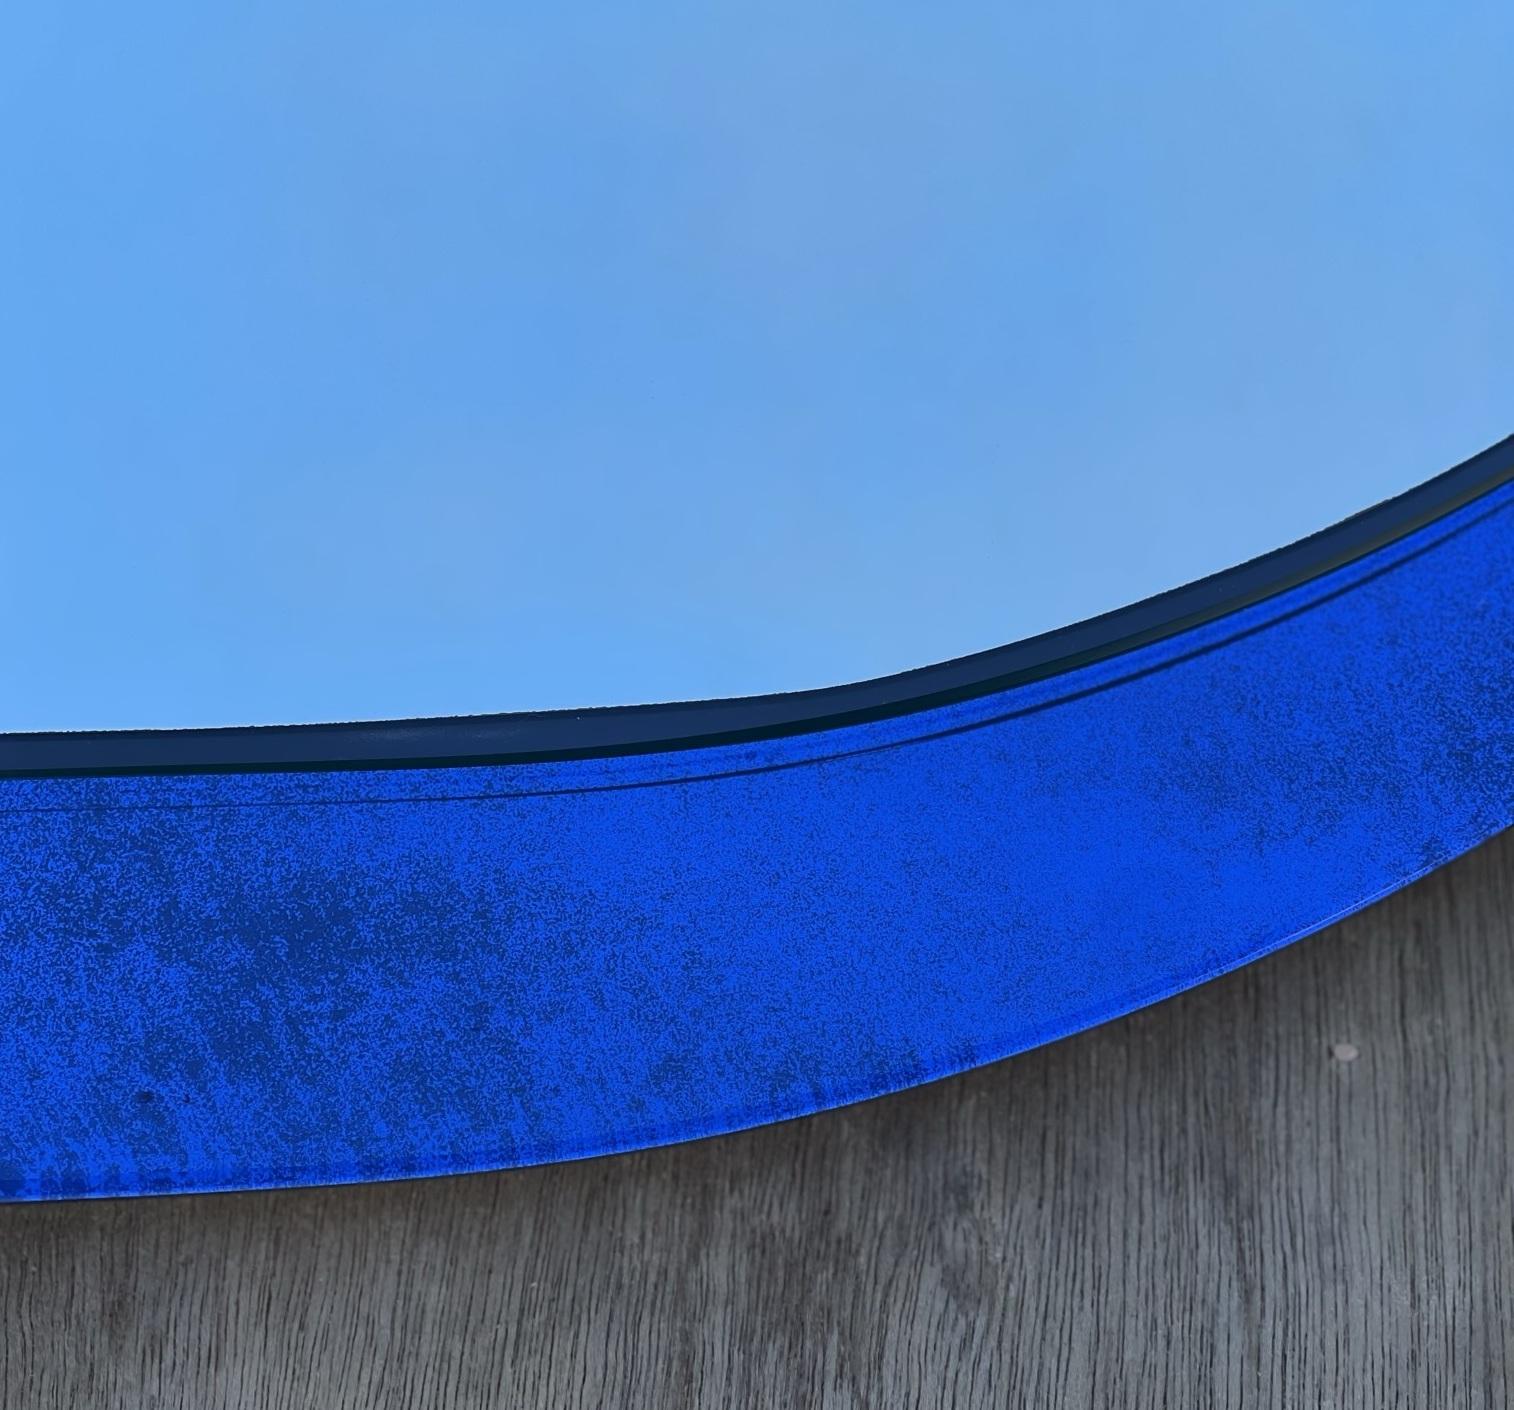 Designer 1970s Veca Made in Italy Mid-Century Modern Wall Cobalt Blue Mirror For Sale 6